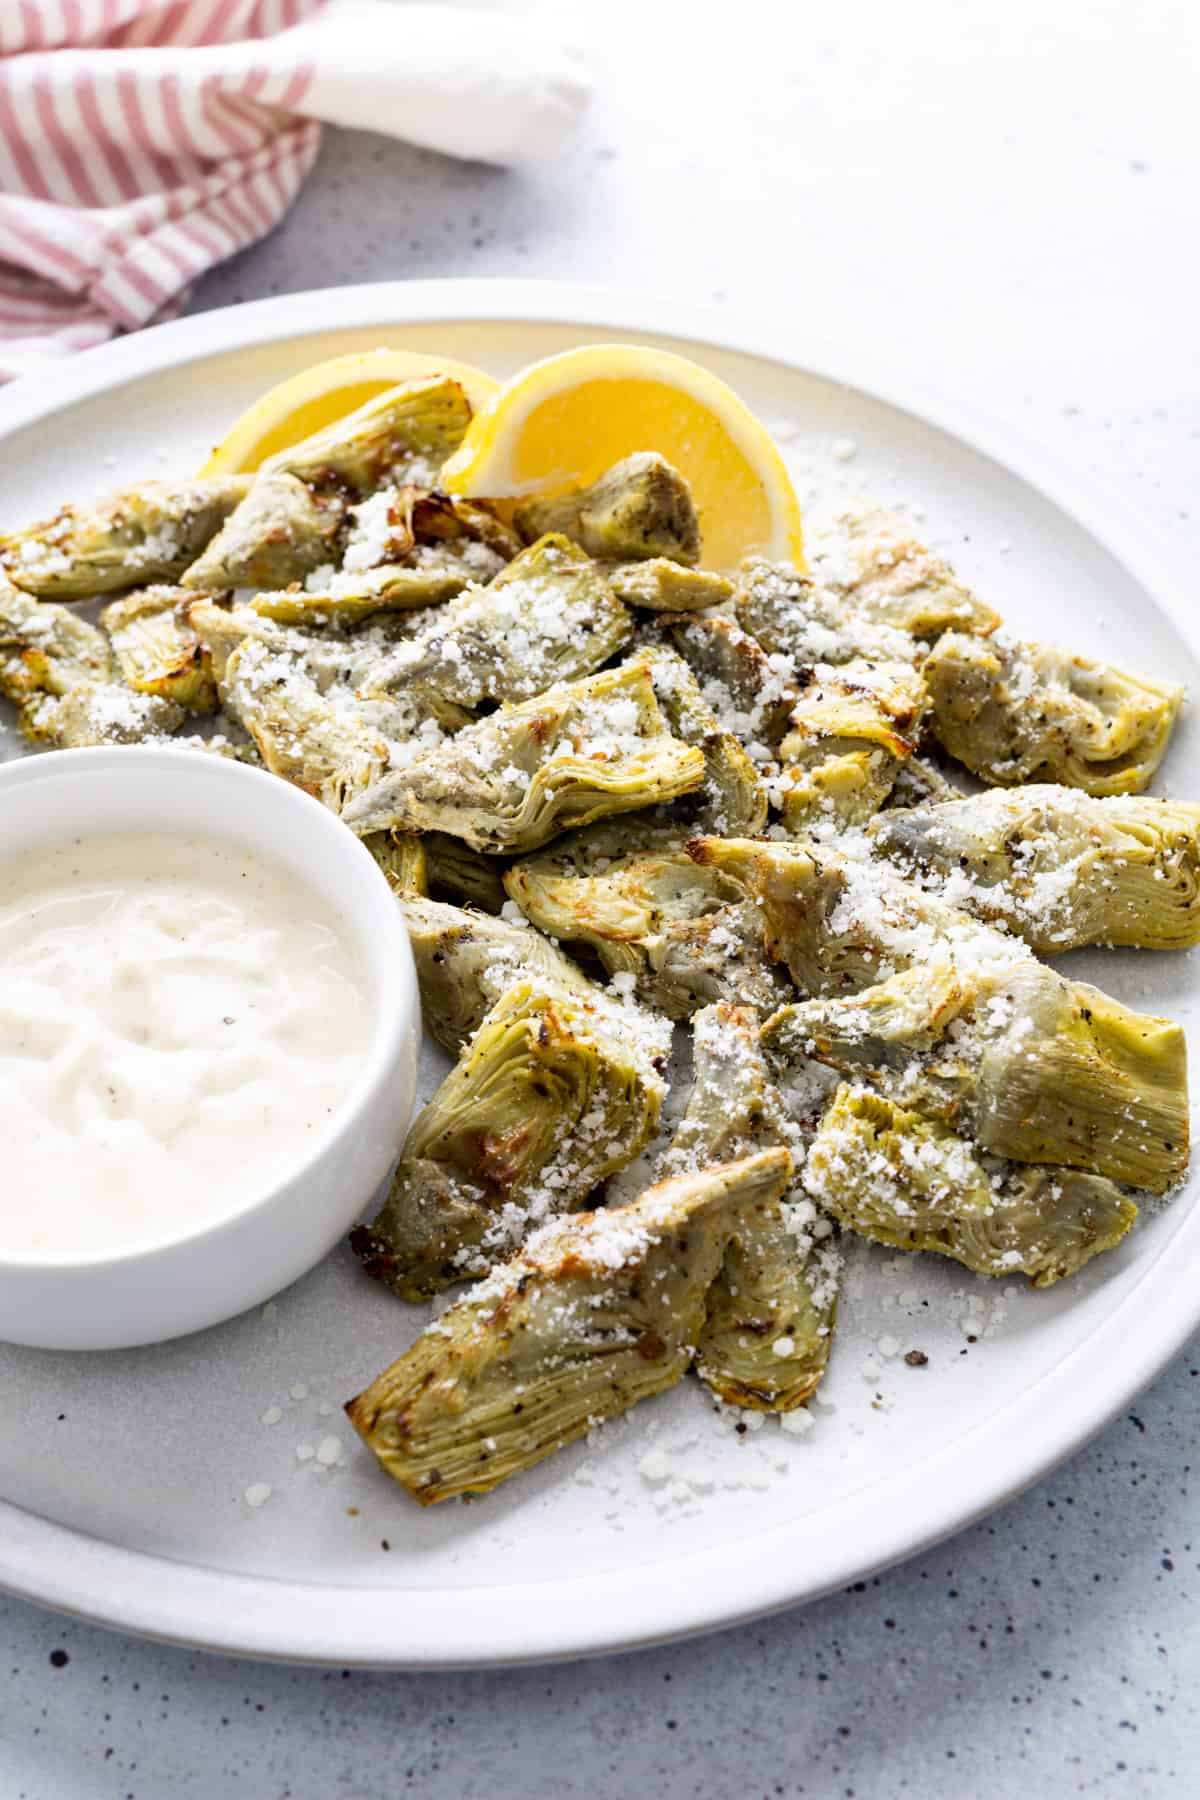 A plate of air-fried artichoke hearts garnished with parmesan cheese with a side of garlic aioli sauce.